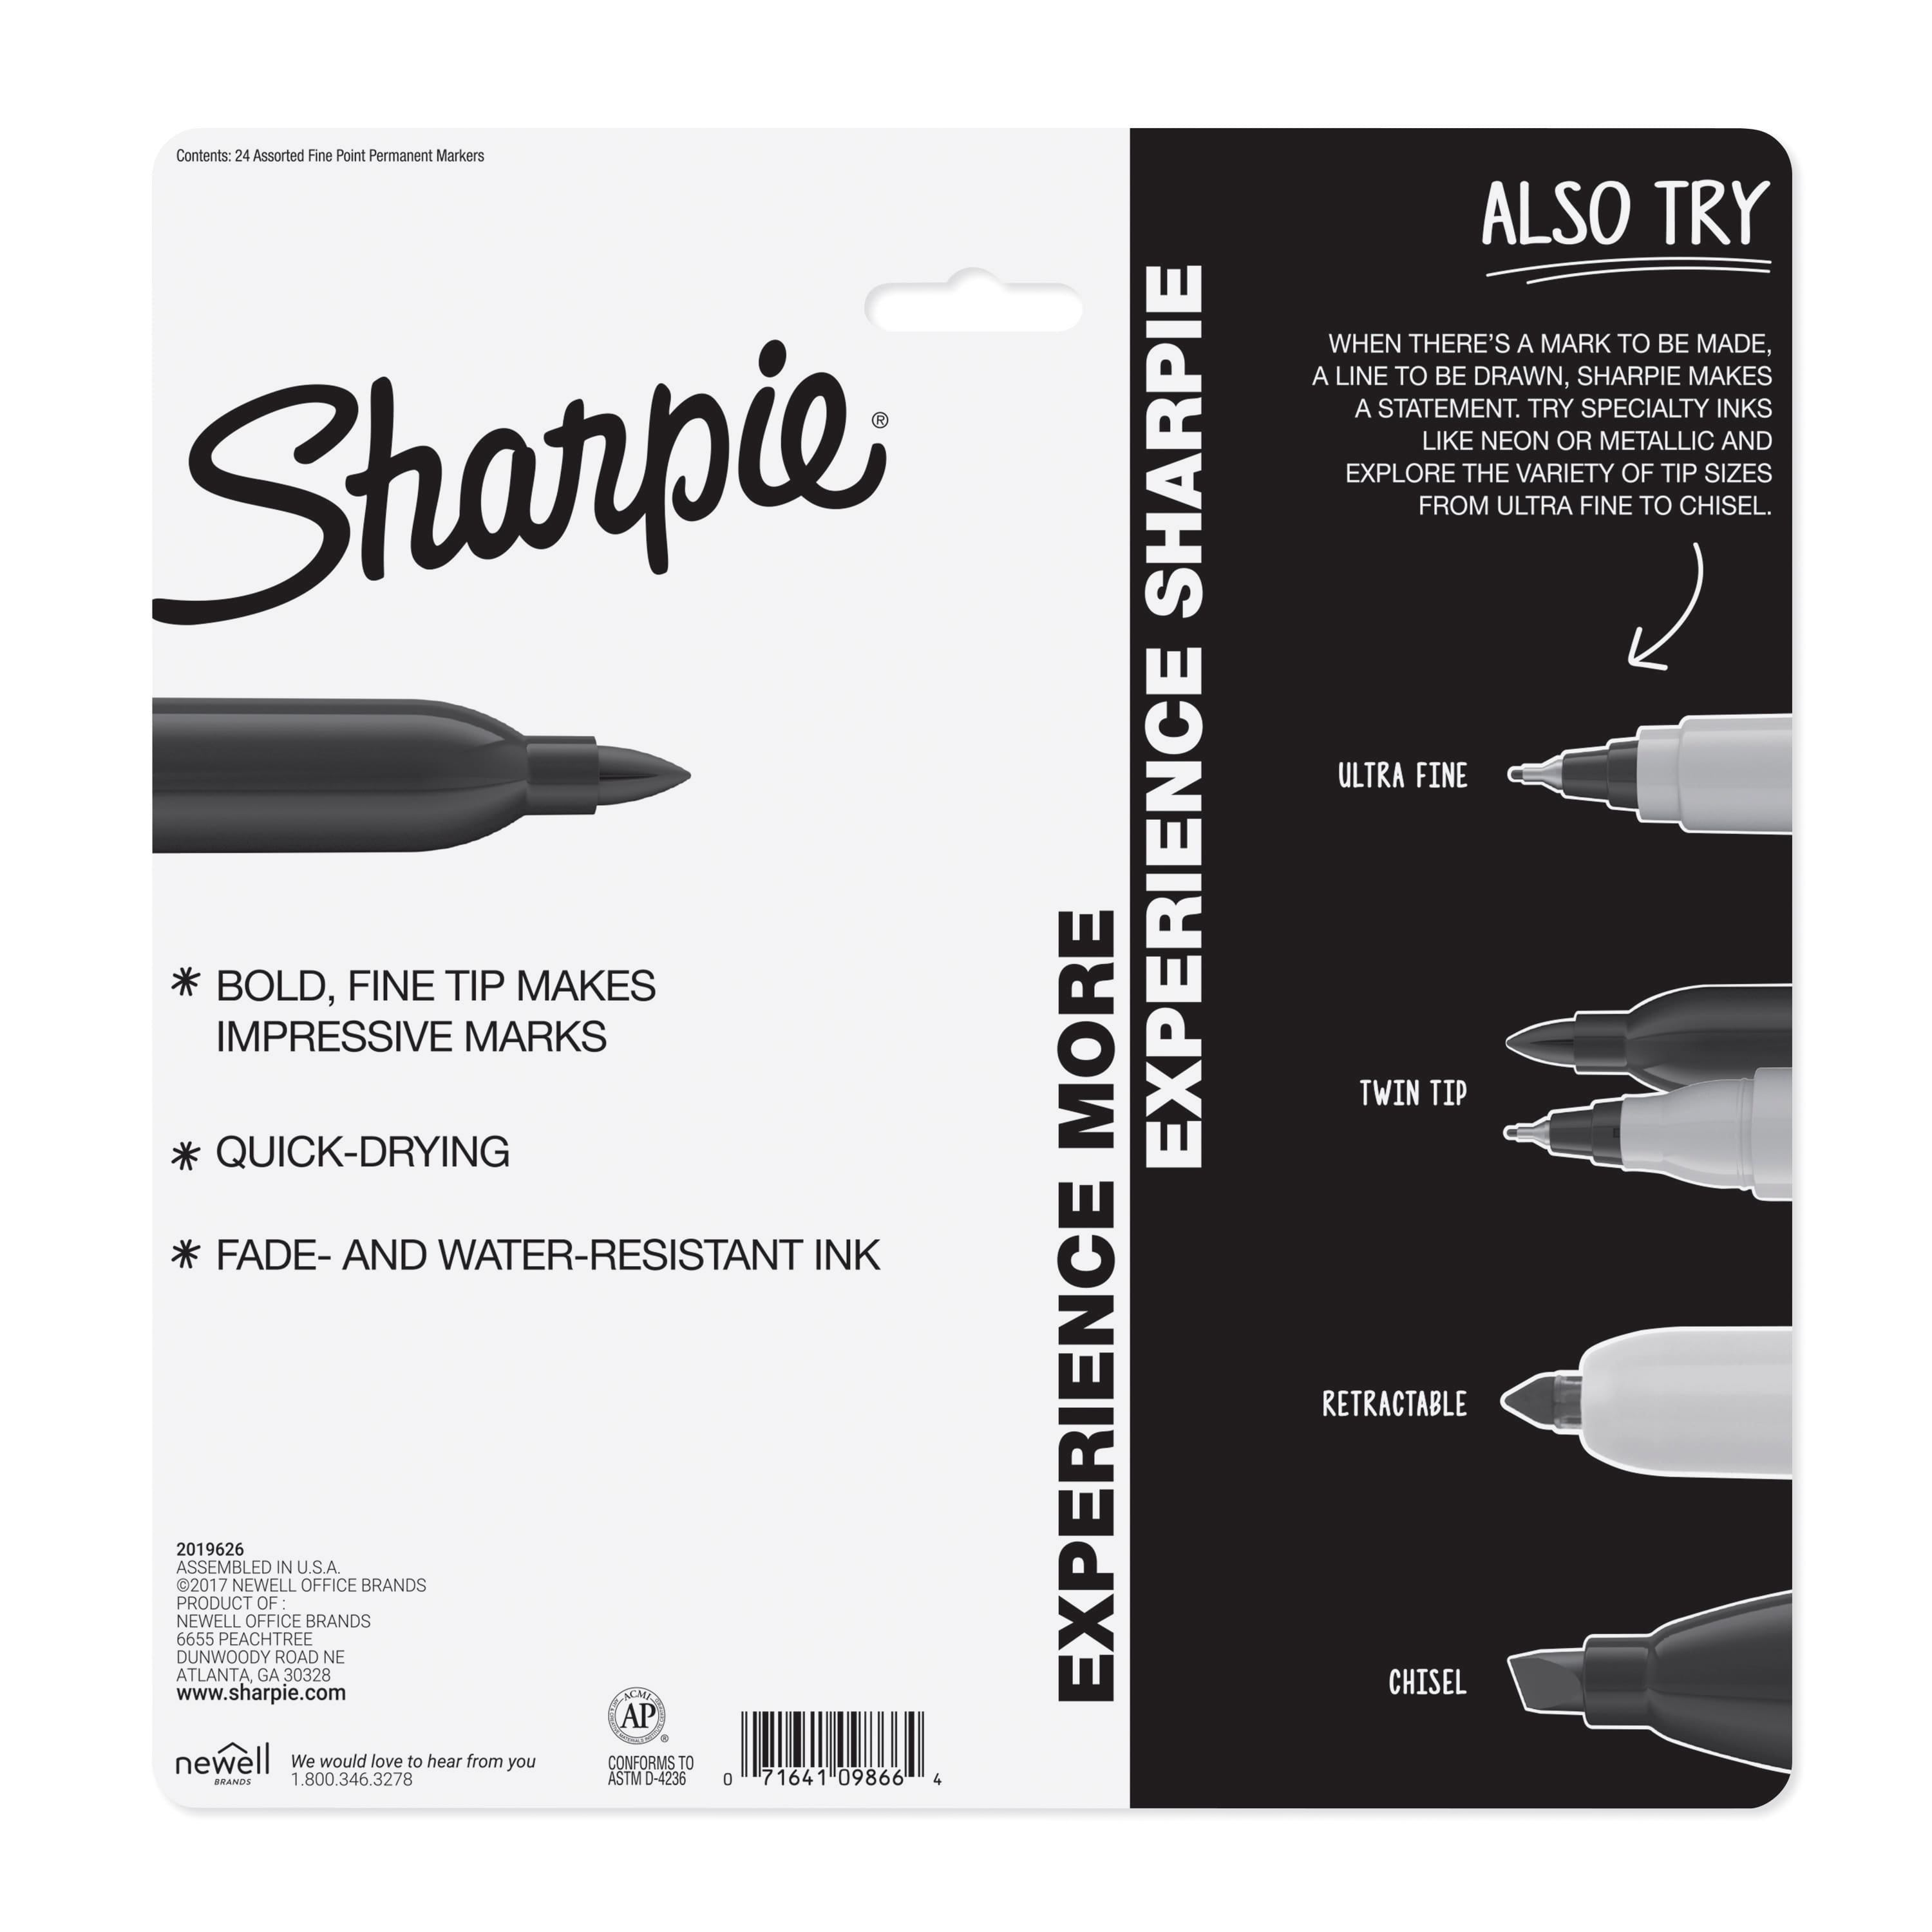 Sharpie eXtreme Permanent Markers, Fine Tip, Black, 4/Pack